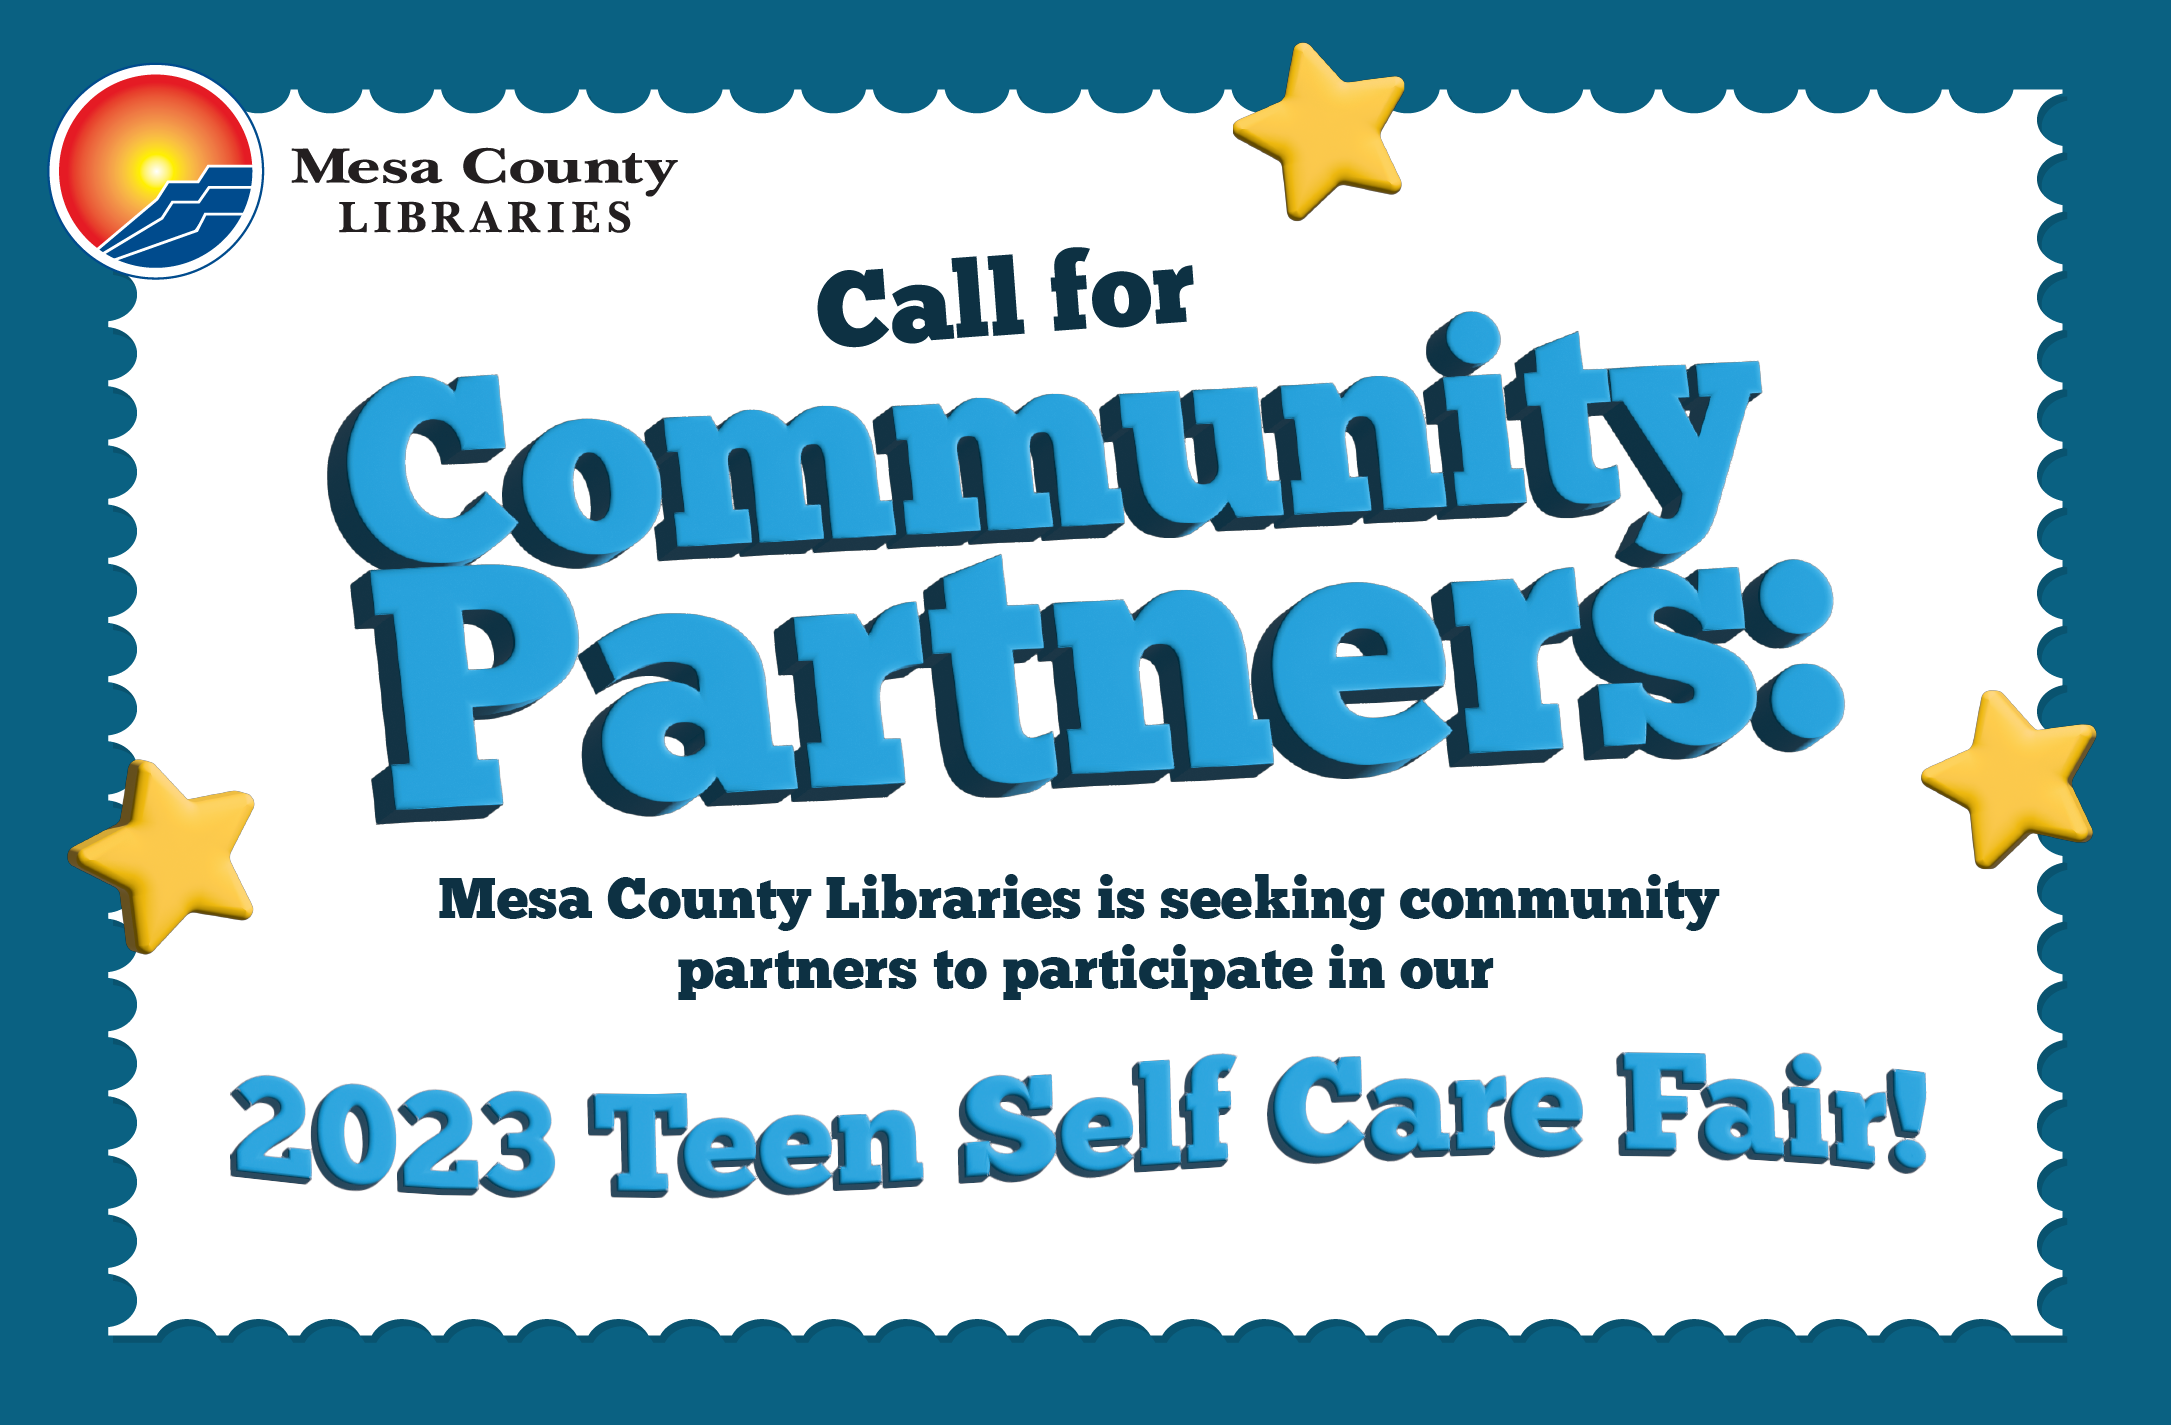 "Call for Community Partners: Mesa County Libraries is seeking community partners to participate in our 2023 Teen Self Care Fair"